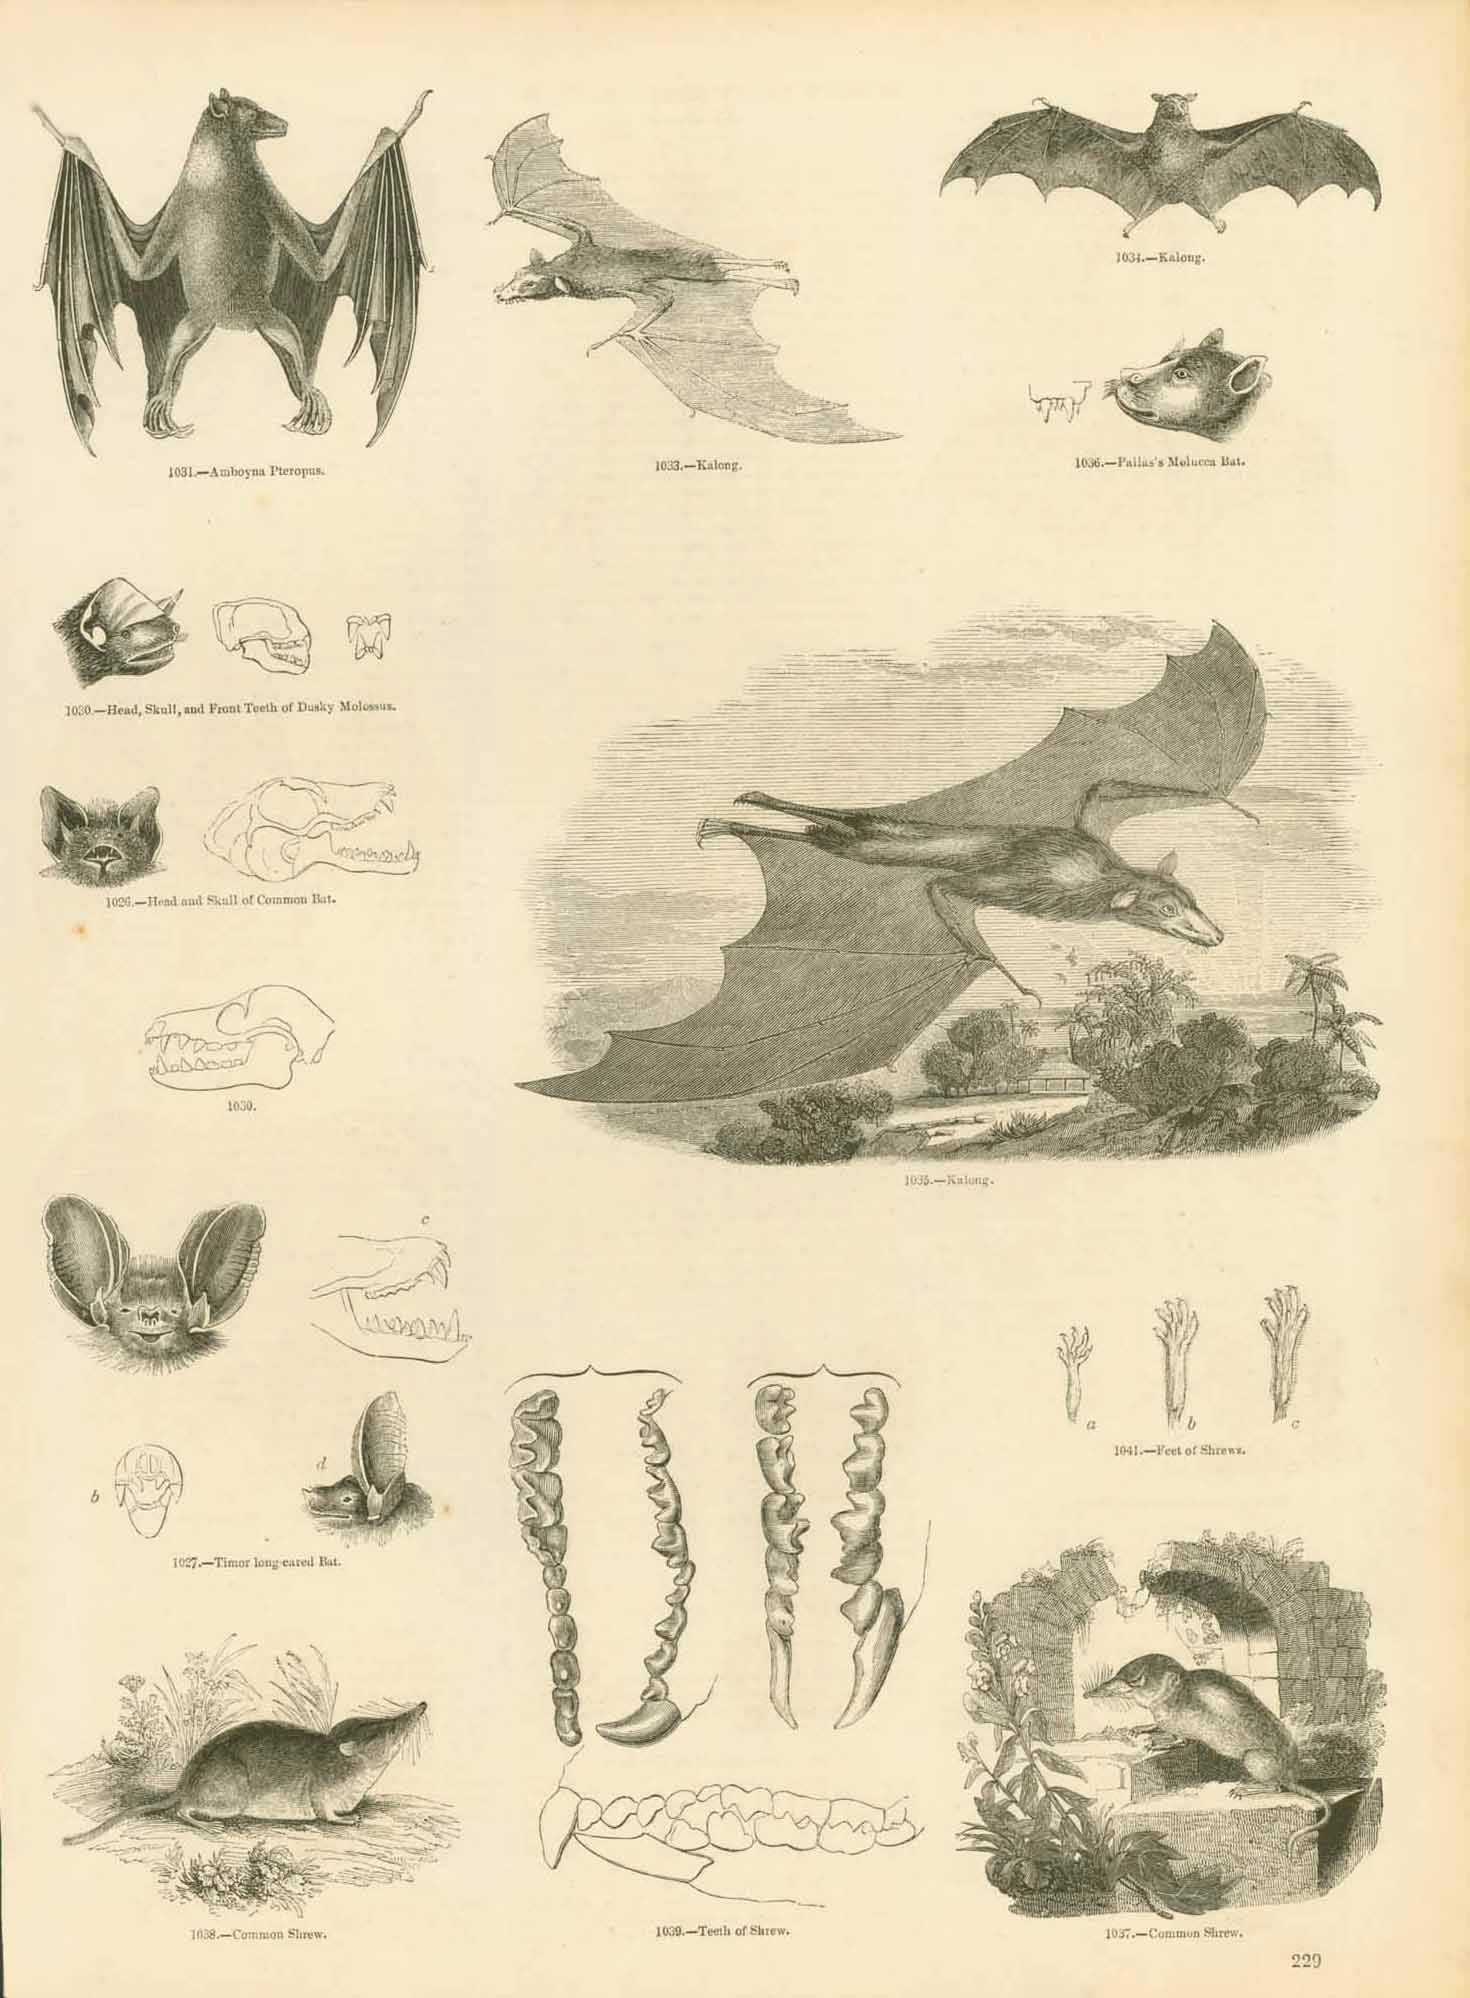 No title. Bats - At bottom: Anatomy of shrews.  Published in "Museum of Animated Nature"  With related text on reverse side.  London, 1861